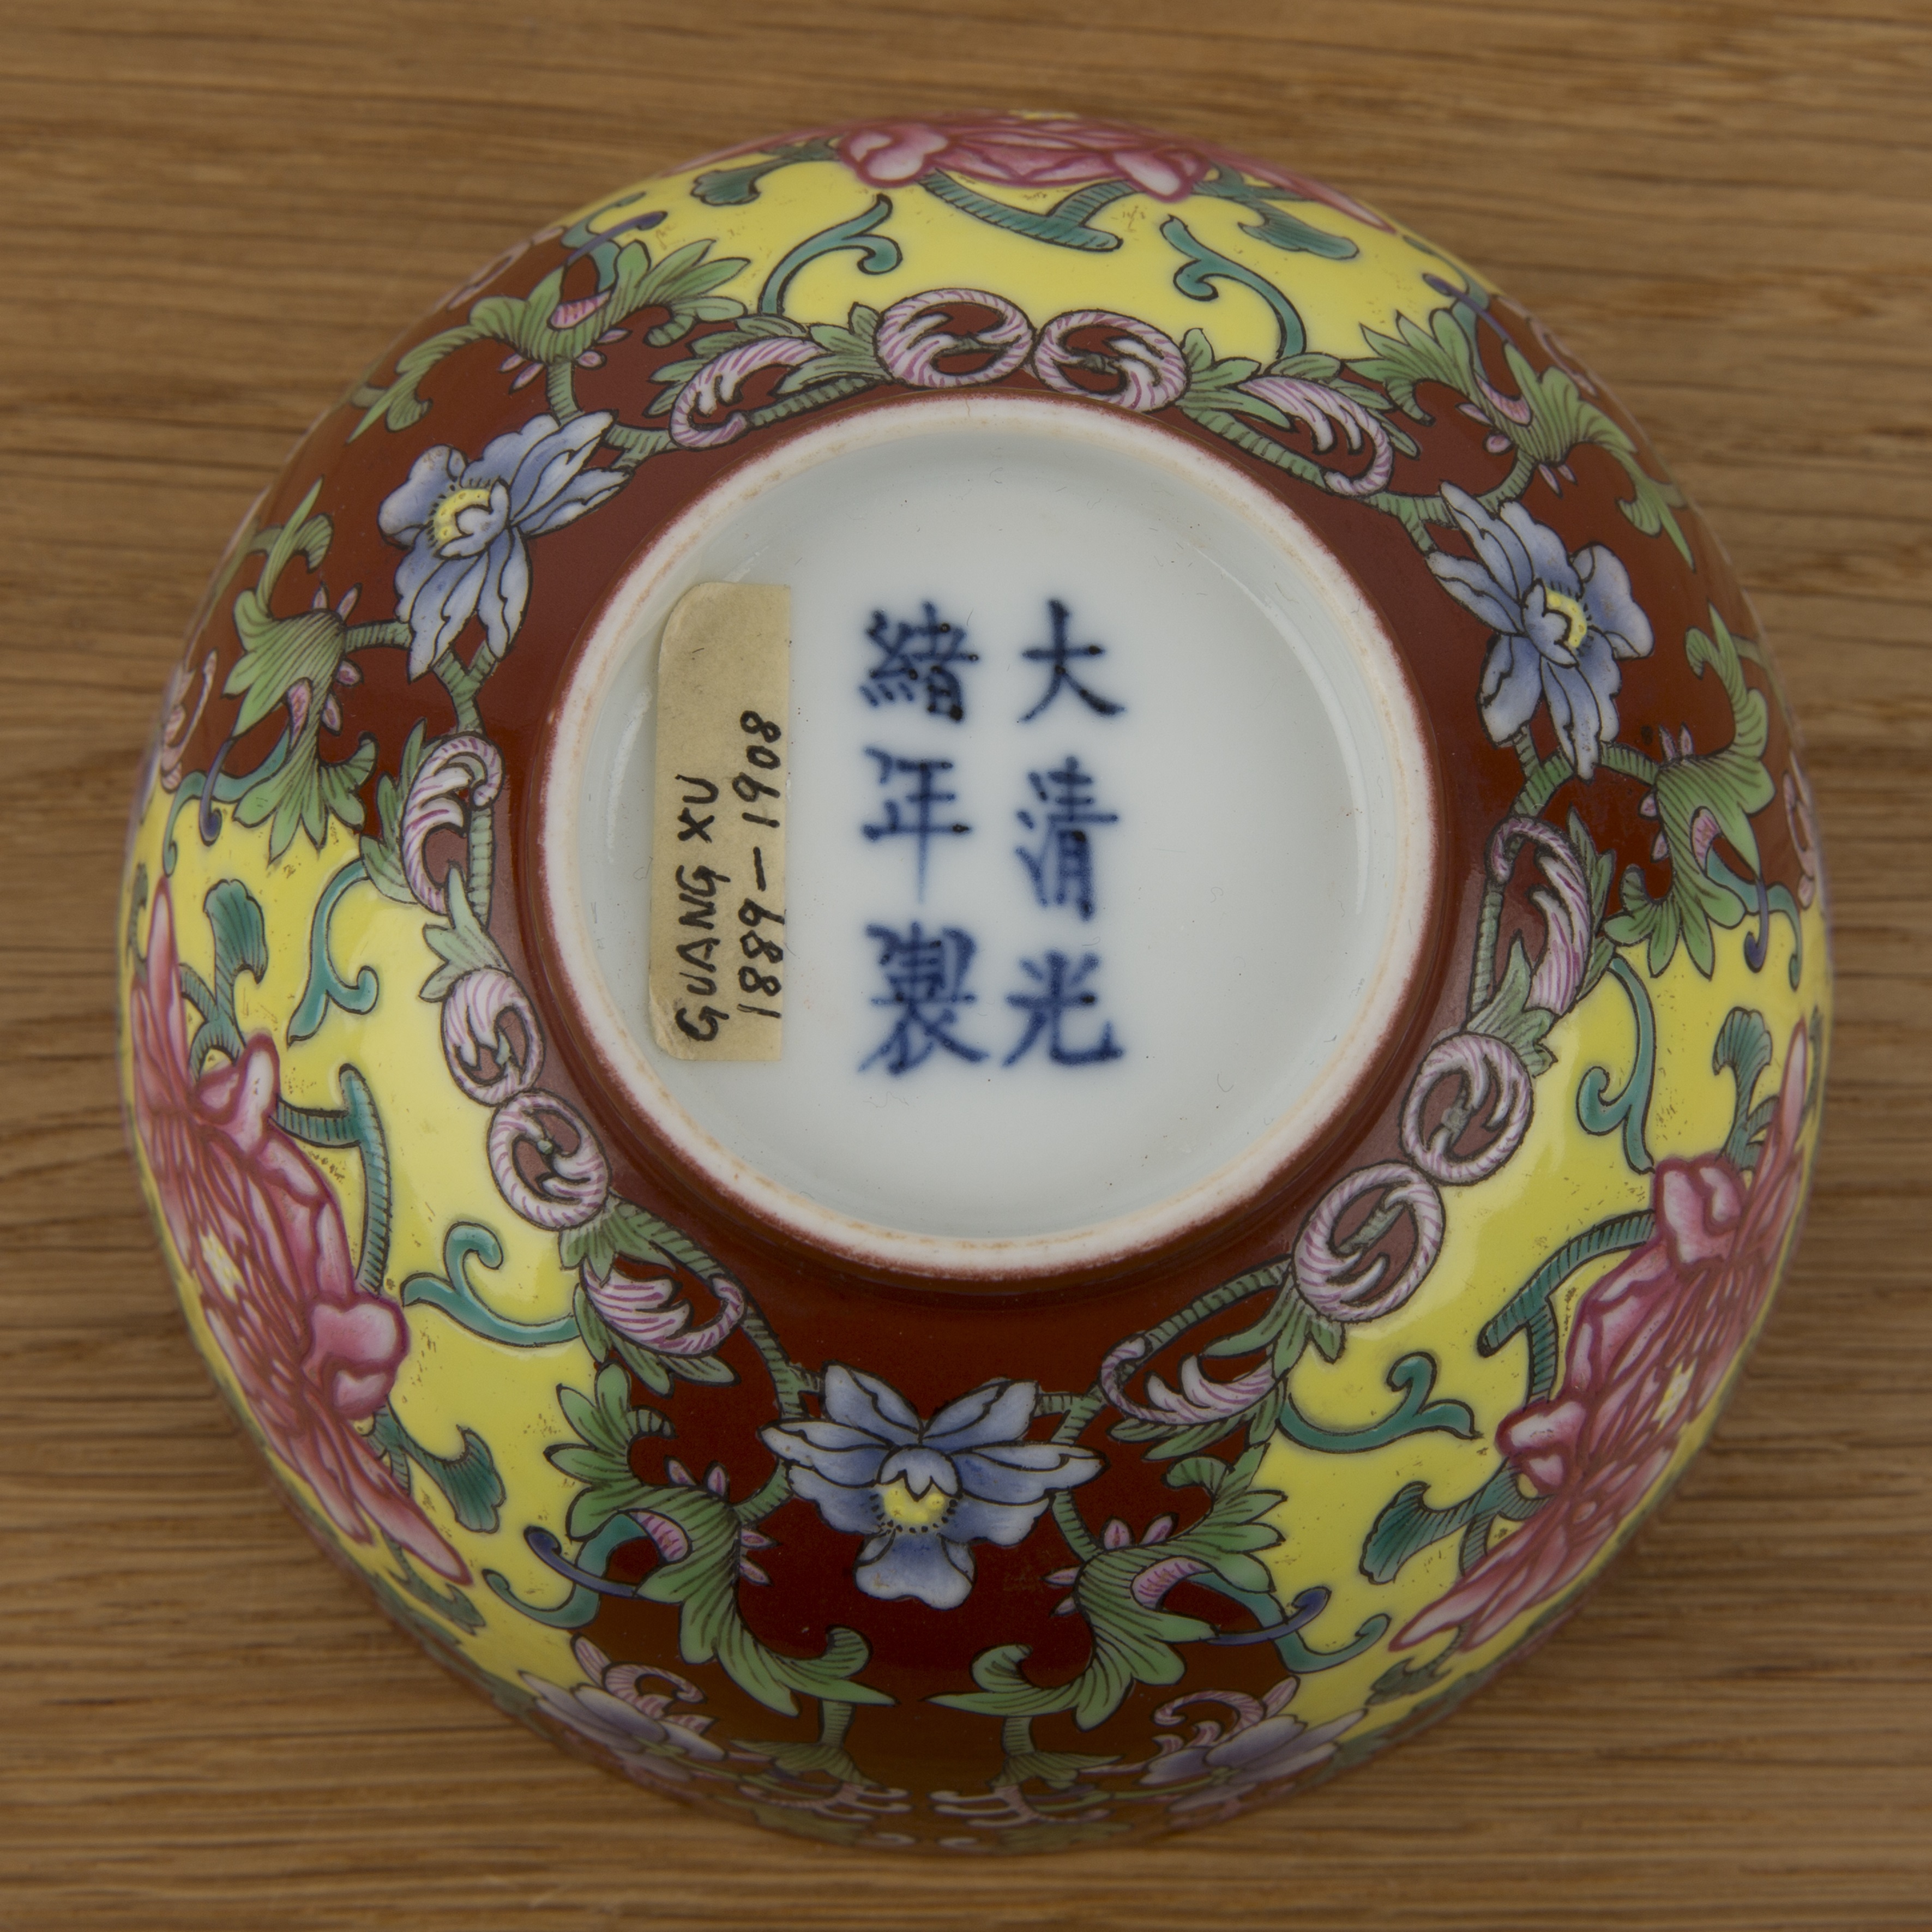 Polychrome enamelled porcelain bowl Chinese, 19th/20th Century painted with peonies and trailing - Image 5 of 12